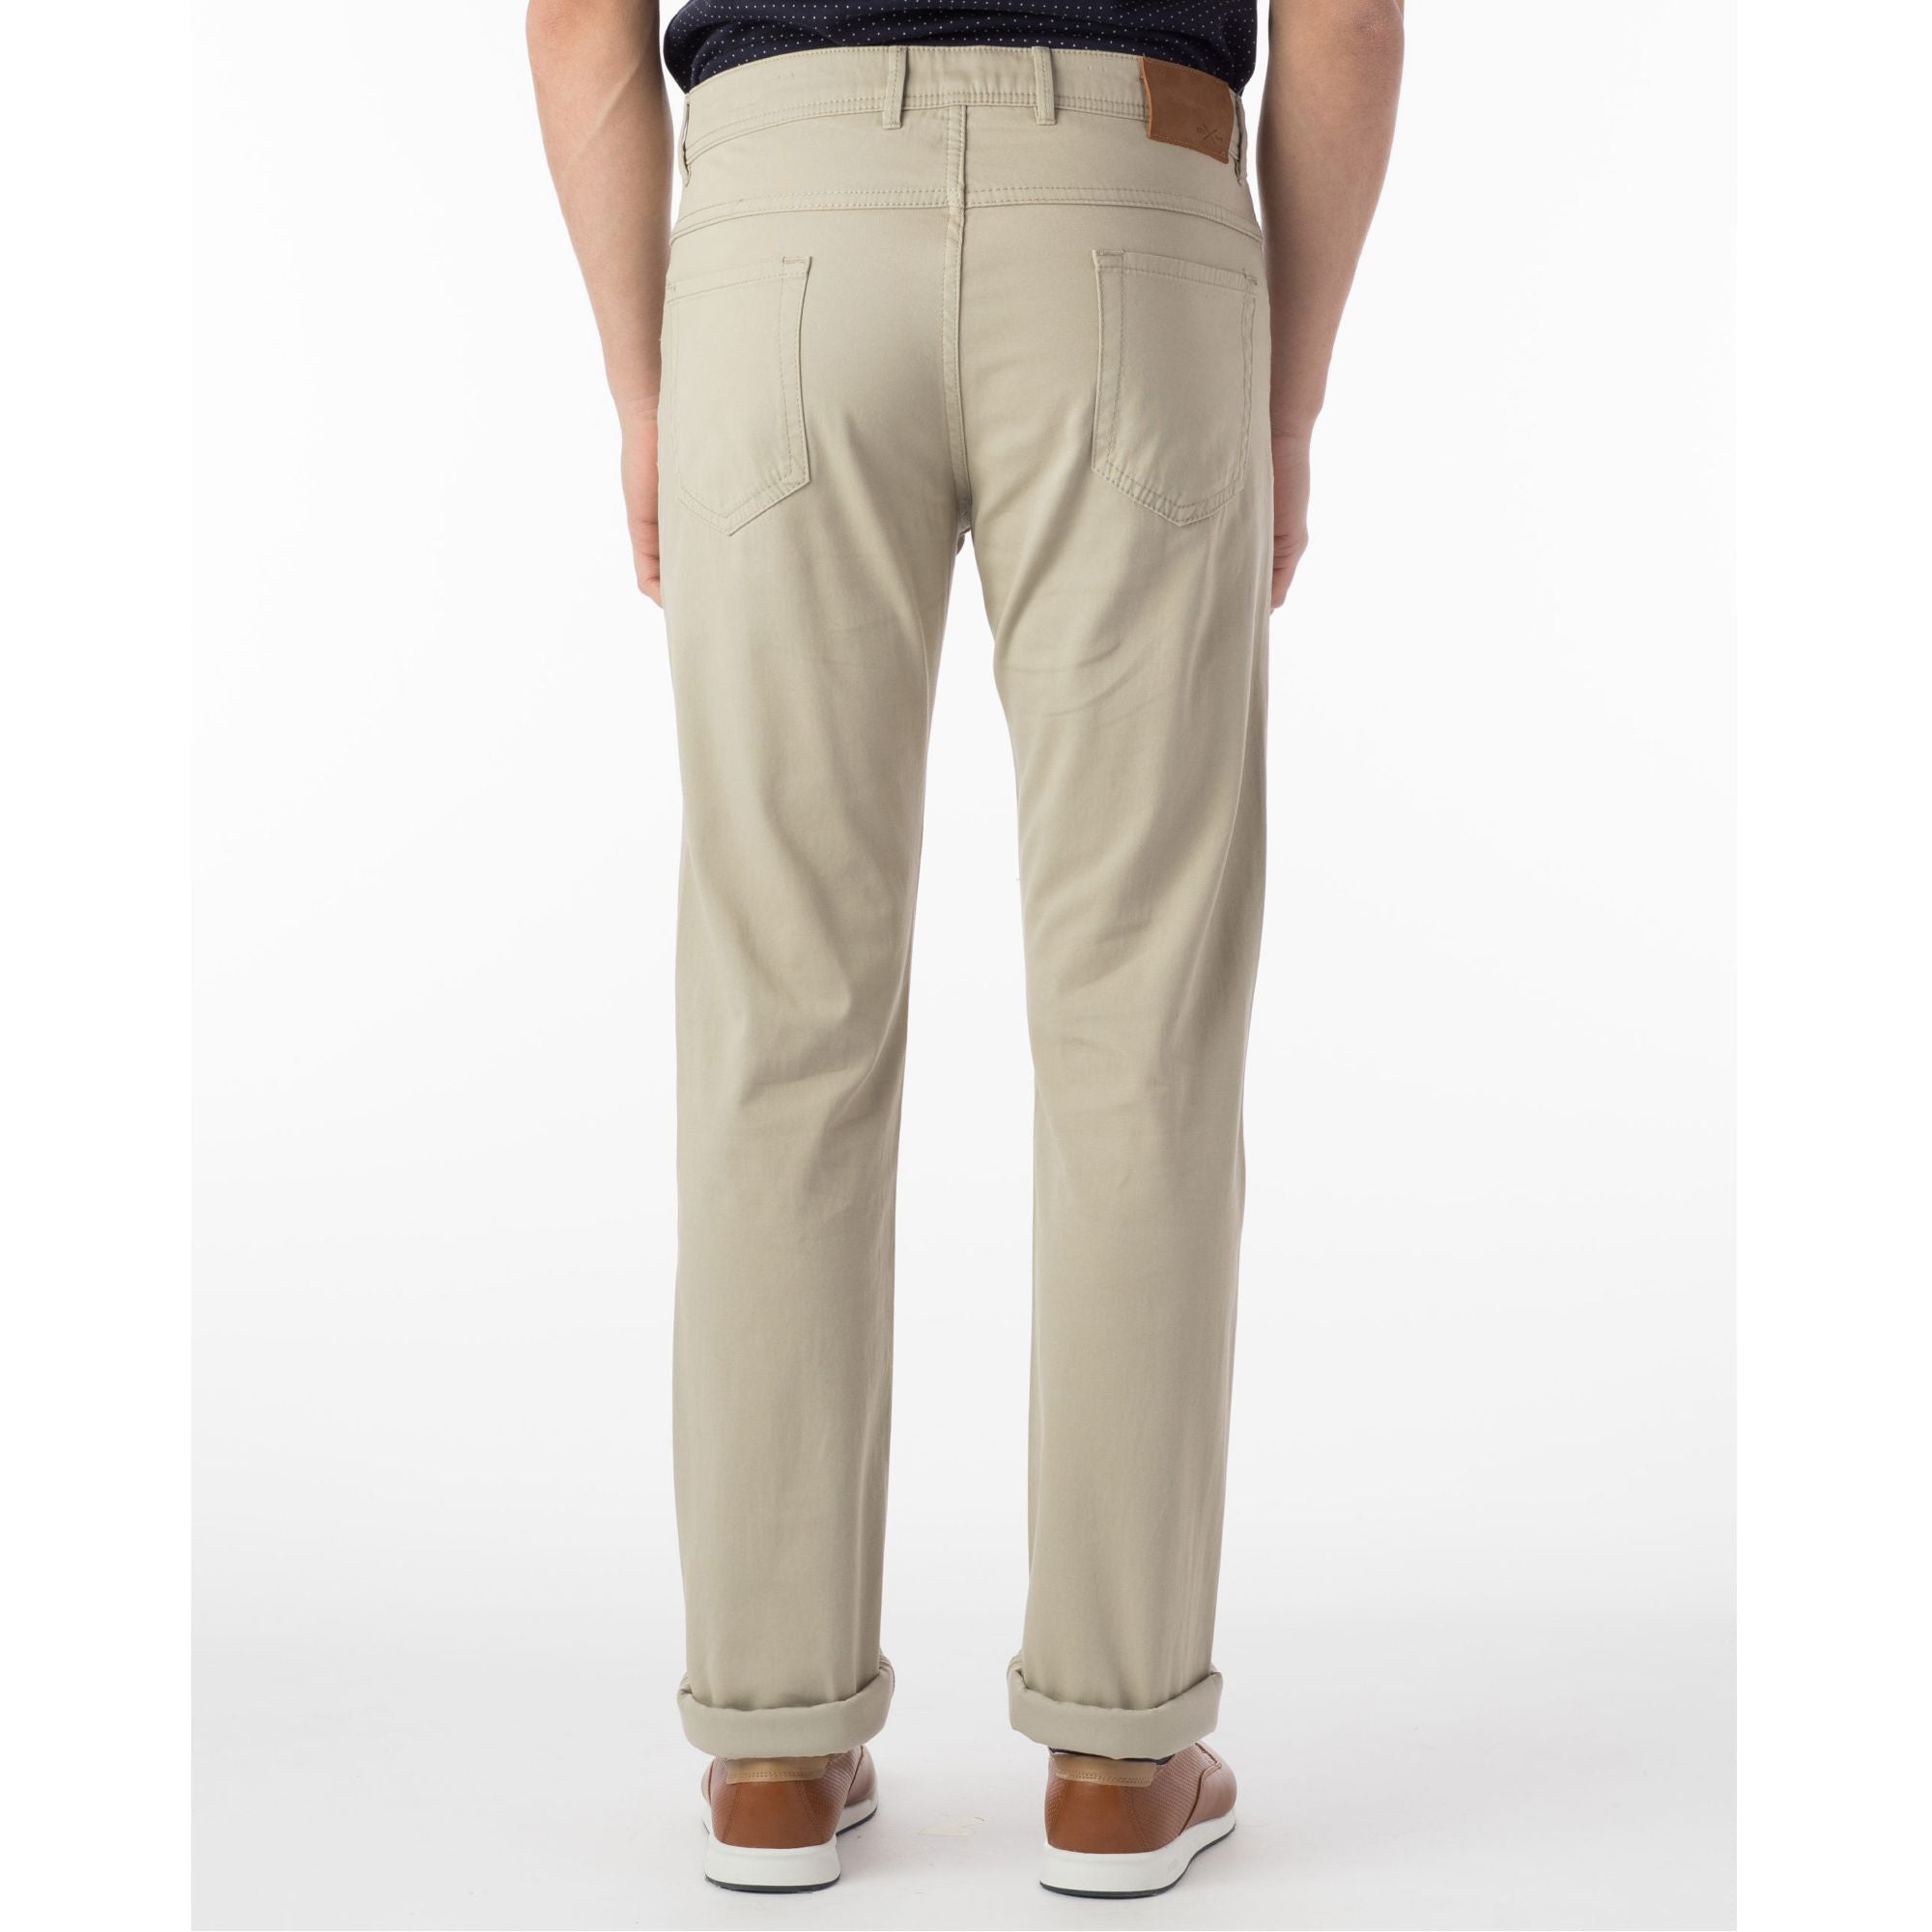 Perma Color Pima Twill 5-Pocket Pants in Stone (Size 31) (Crescent Modern Fit) by Ballin